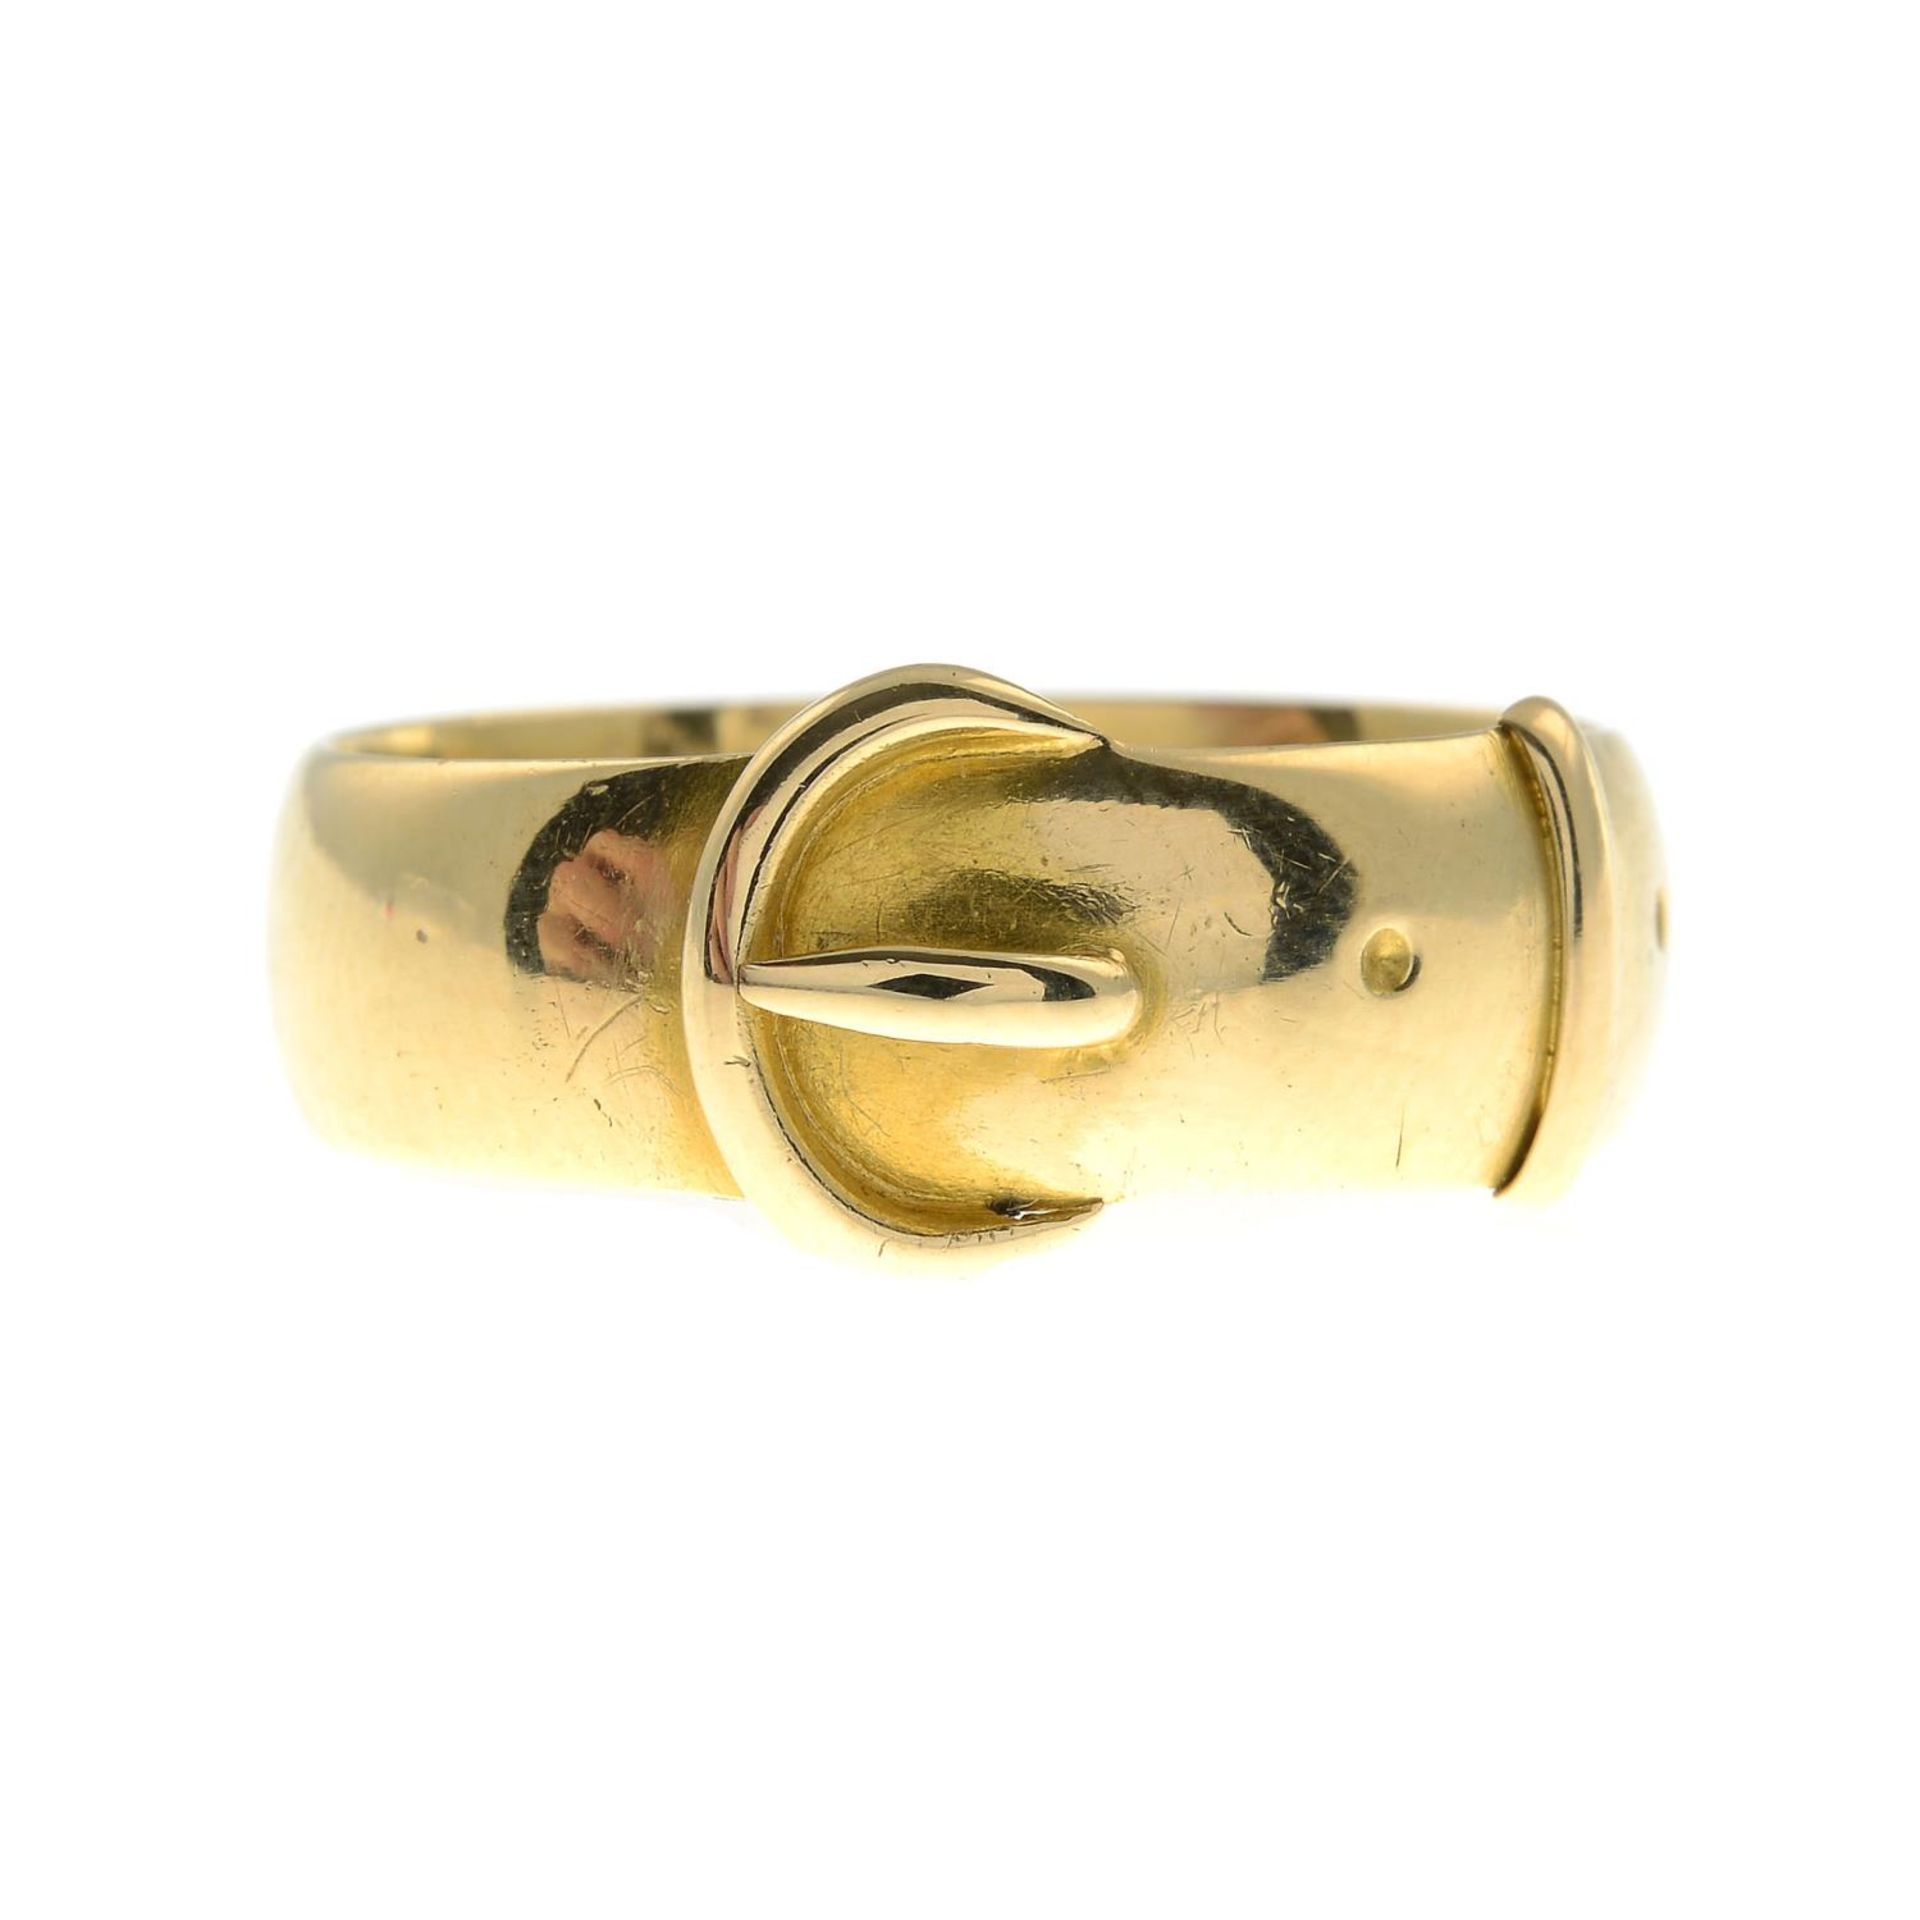 A late Victorian 18ct gold buckle ring.Hallmarks for London, 1888.Ring size U.